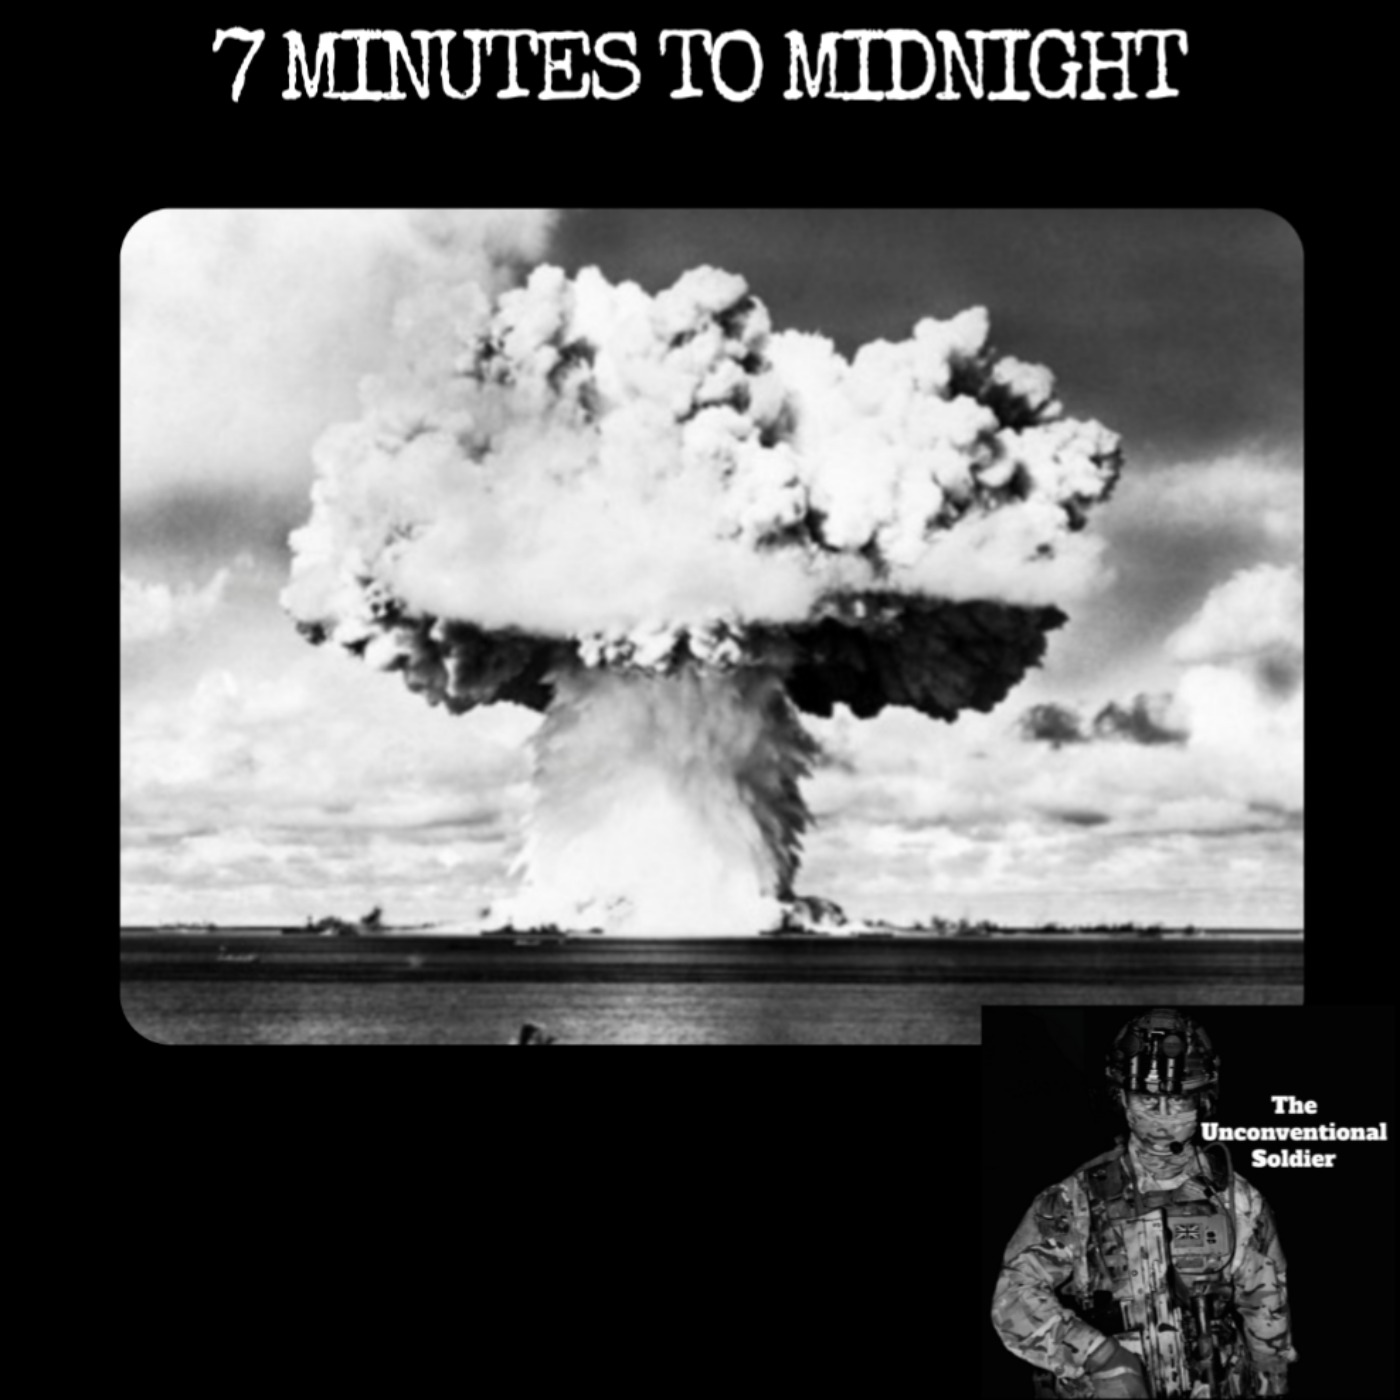 S4 #061 7 Minutes To Midnight - NATO Cold War "Stay Behind" Operations